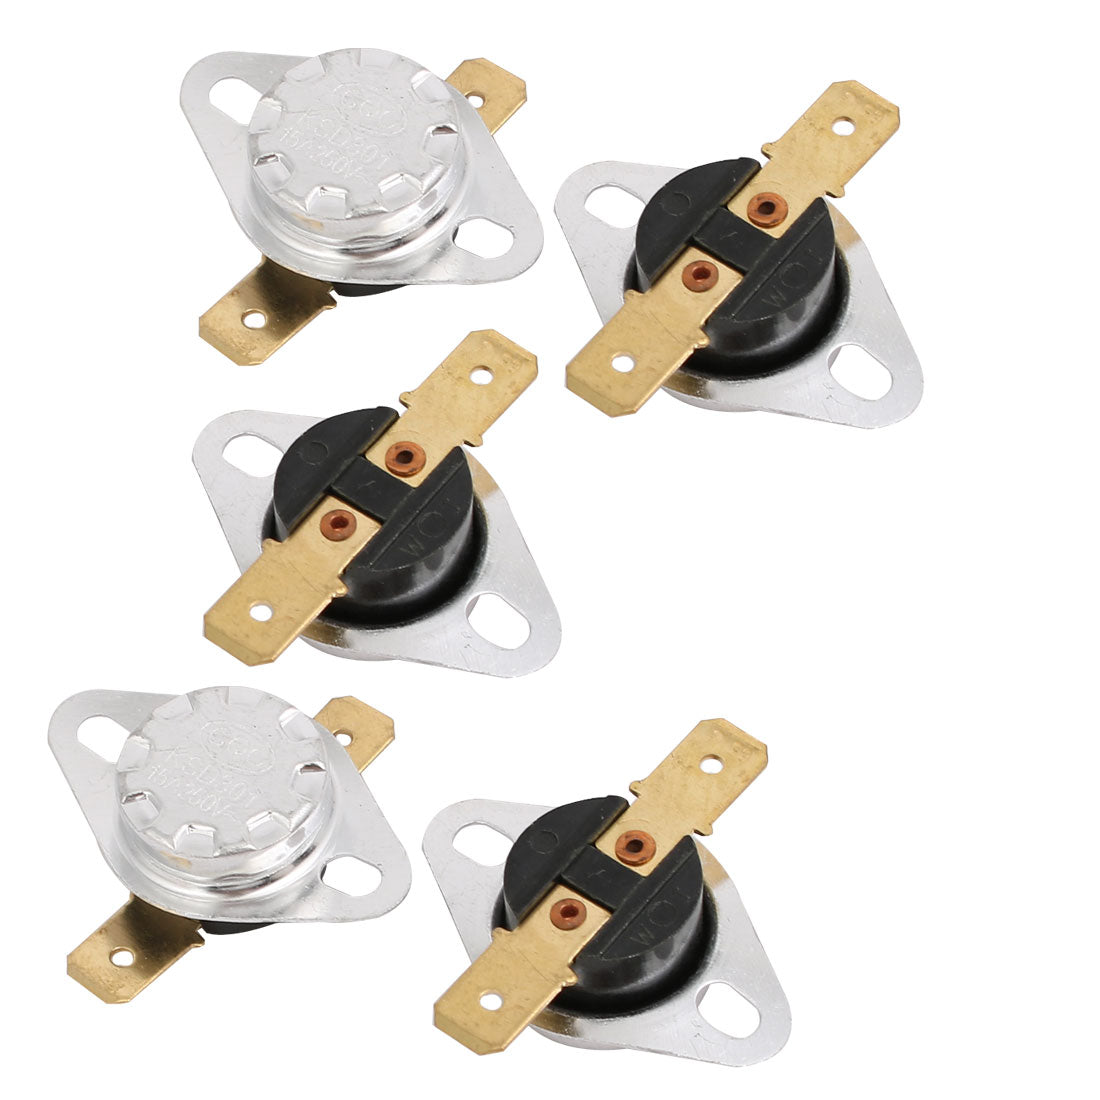 uxcell Uxcell 5pcs KSD301 AC 250V 15A 60C NC Thermostat Temp Controlling Switch Silver Tone